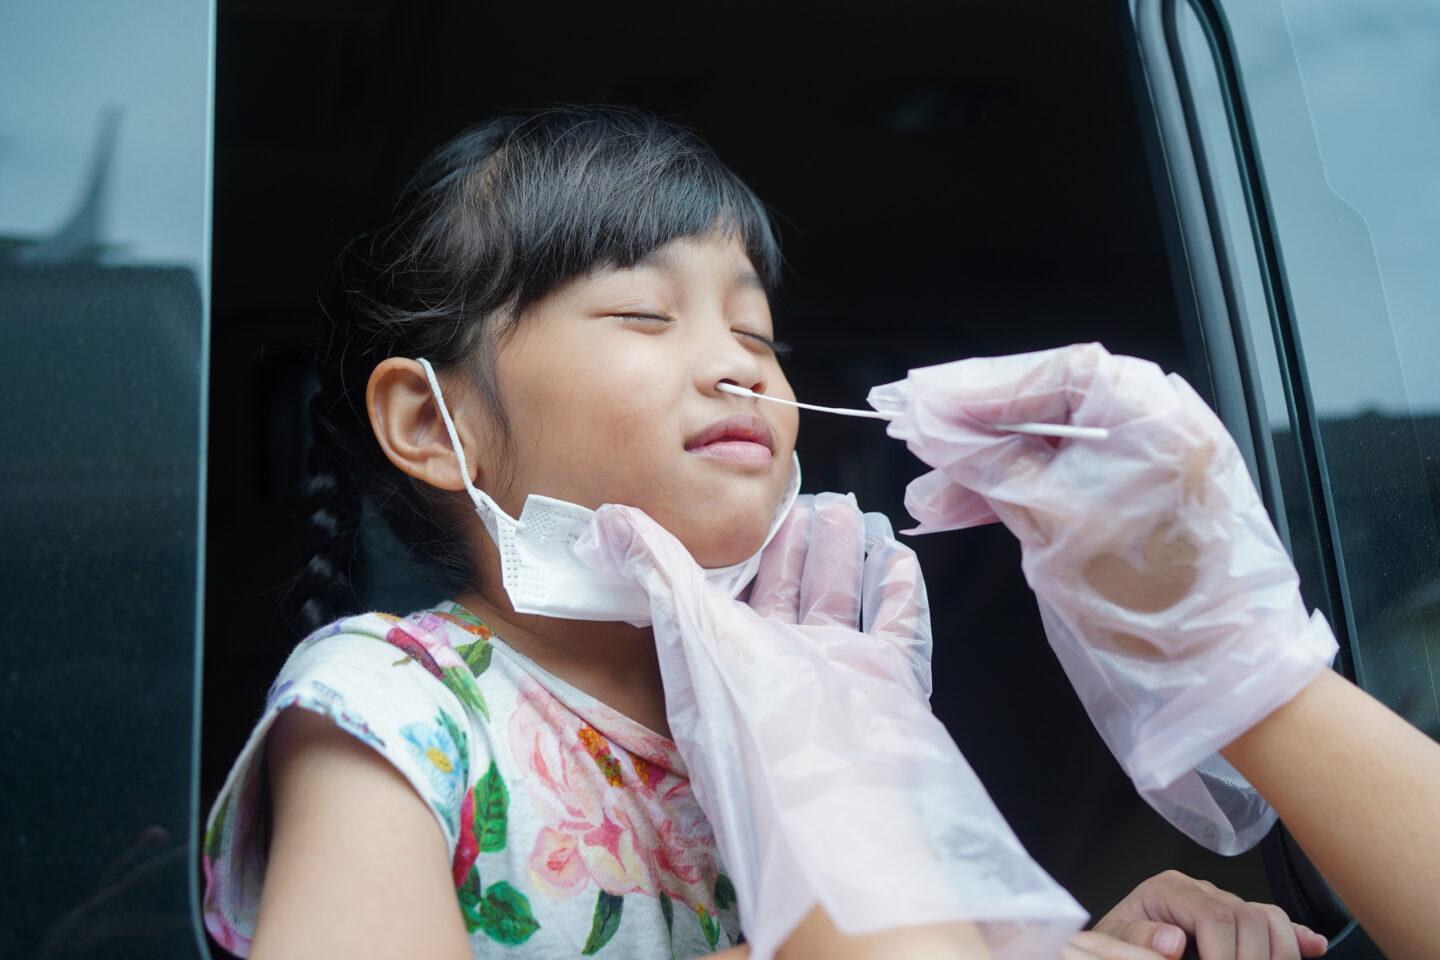 covid and diabetes in kids: young girl having covid PCR test done through car window